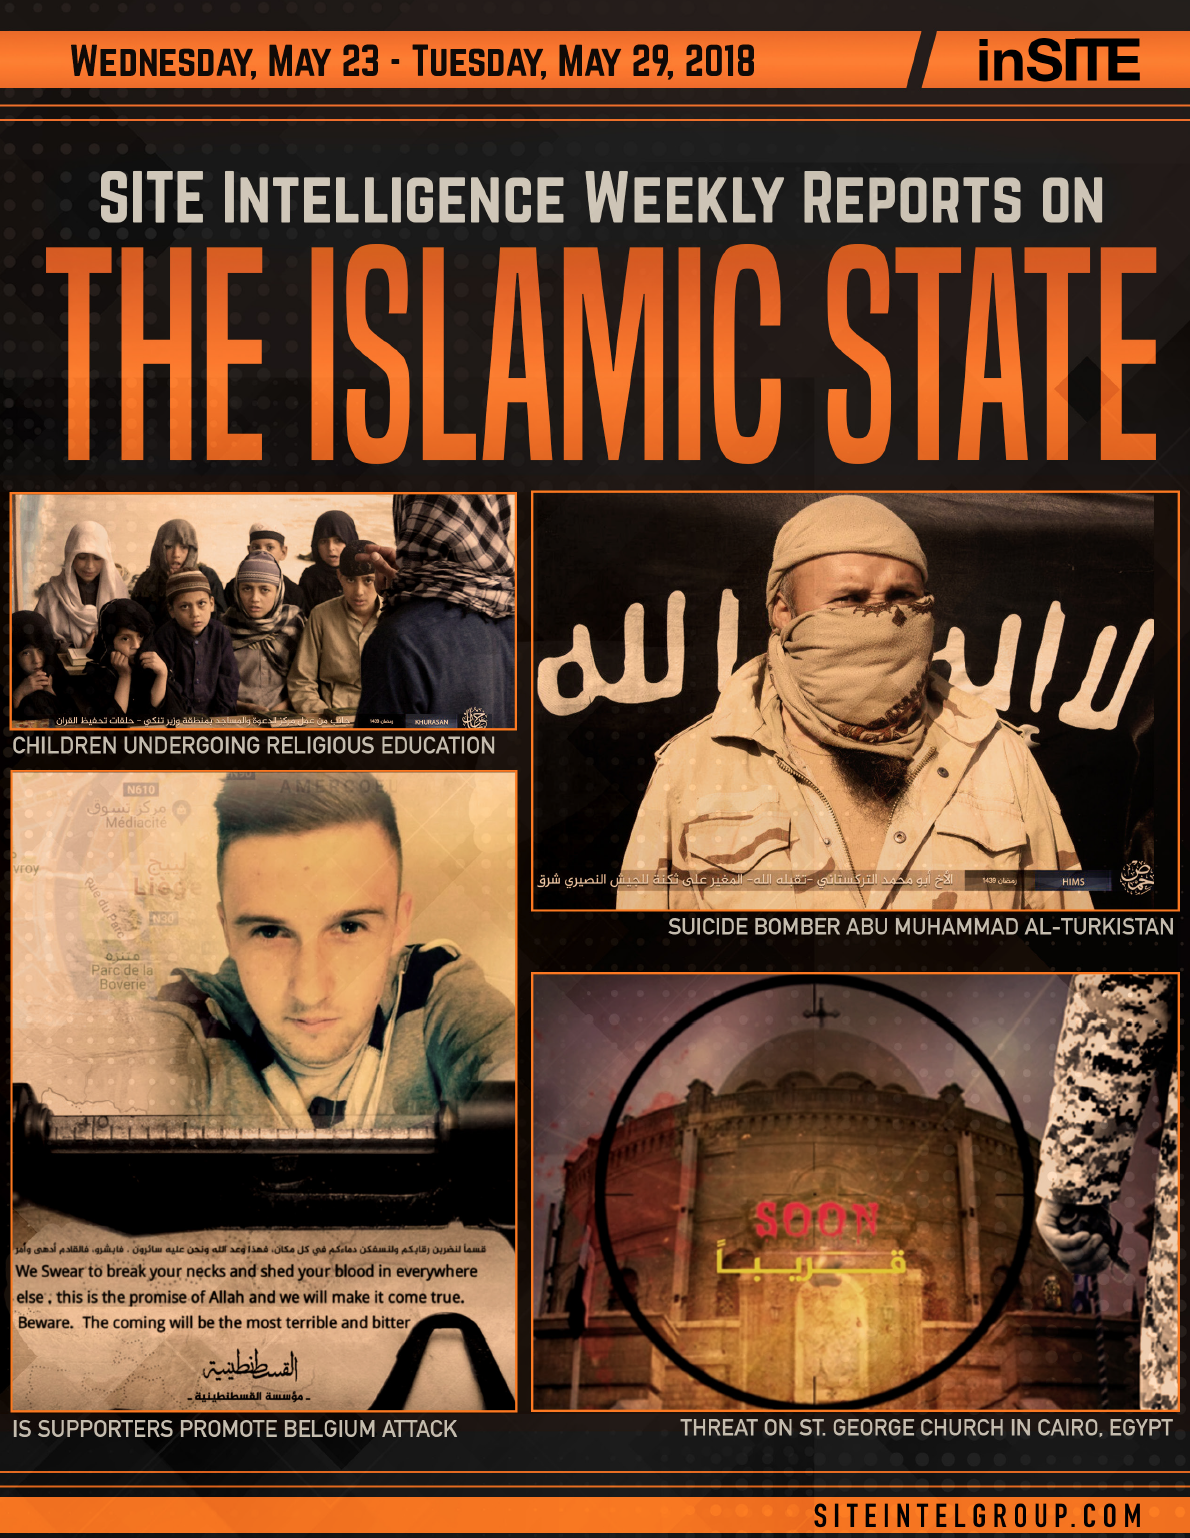 Weekly inSITE on the Islamic State for May 23-29, 2018